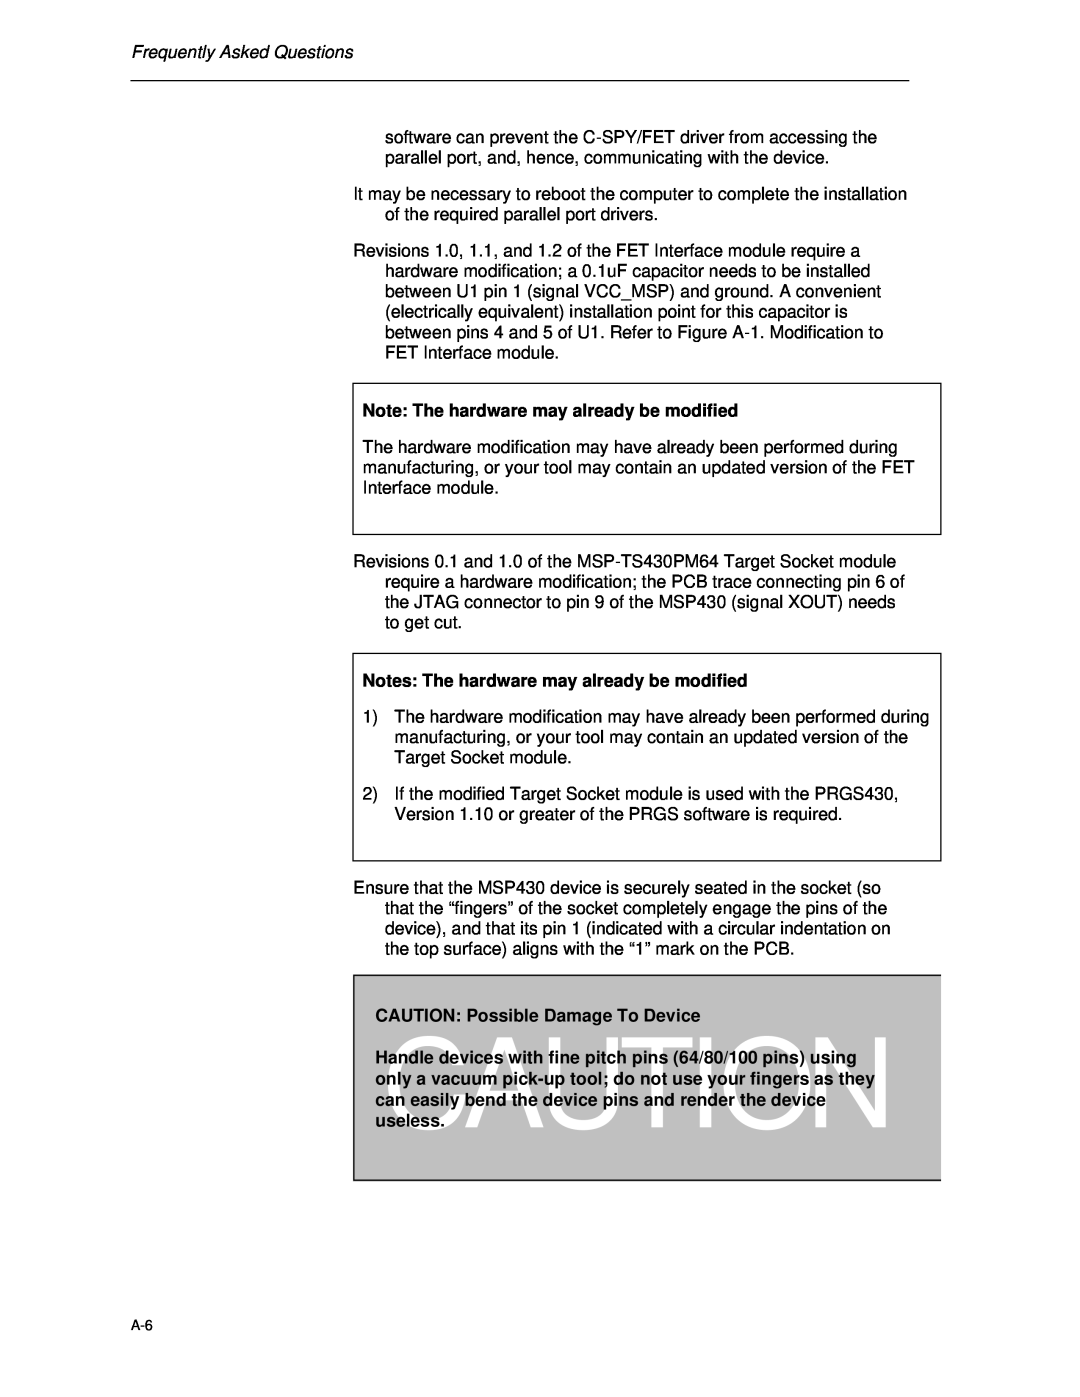 Texas Instruments MSP-FET430 manual Frequently Asked Questions, Note The hardware may already be modified 